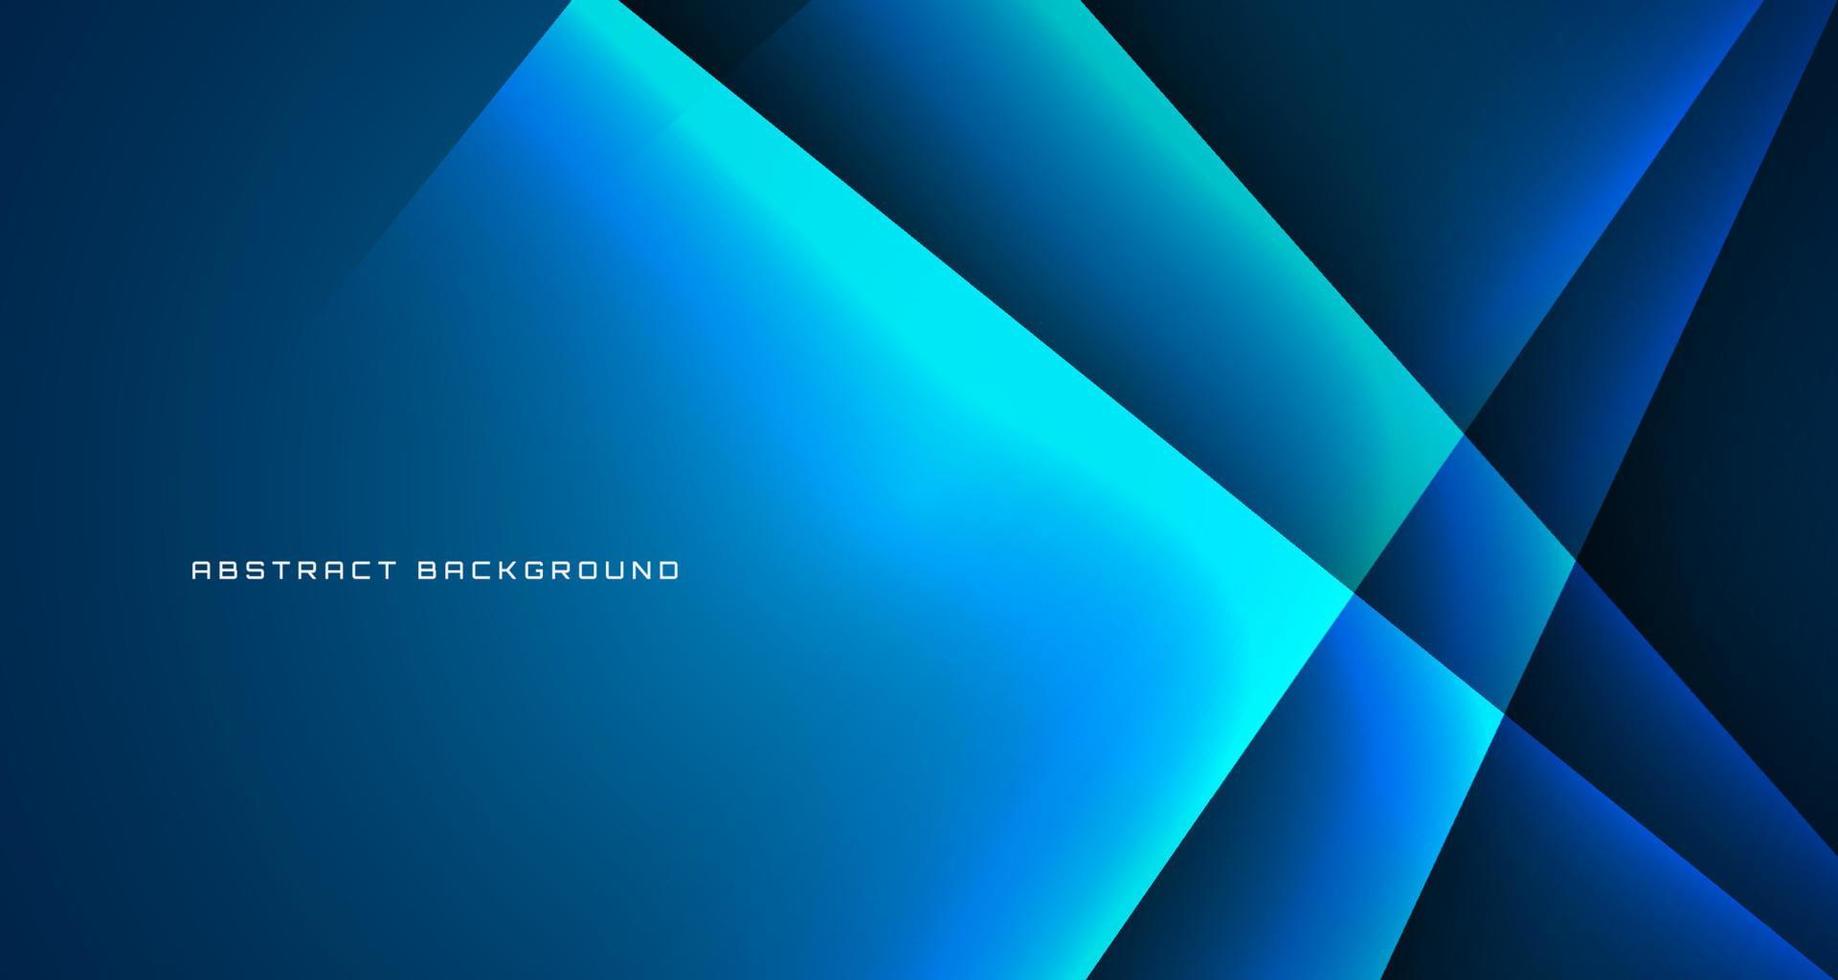 3D blue techno abstract background overlap layer on dark space with light line decoration. Graphic design element cutout style concept for banner, flyer, card, brochure cover, or landing page vector